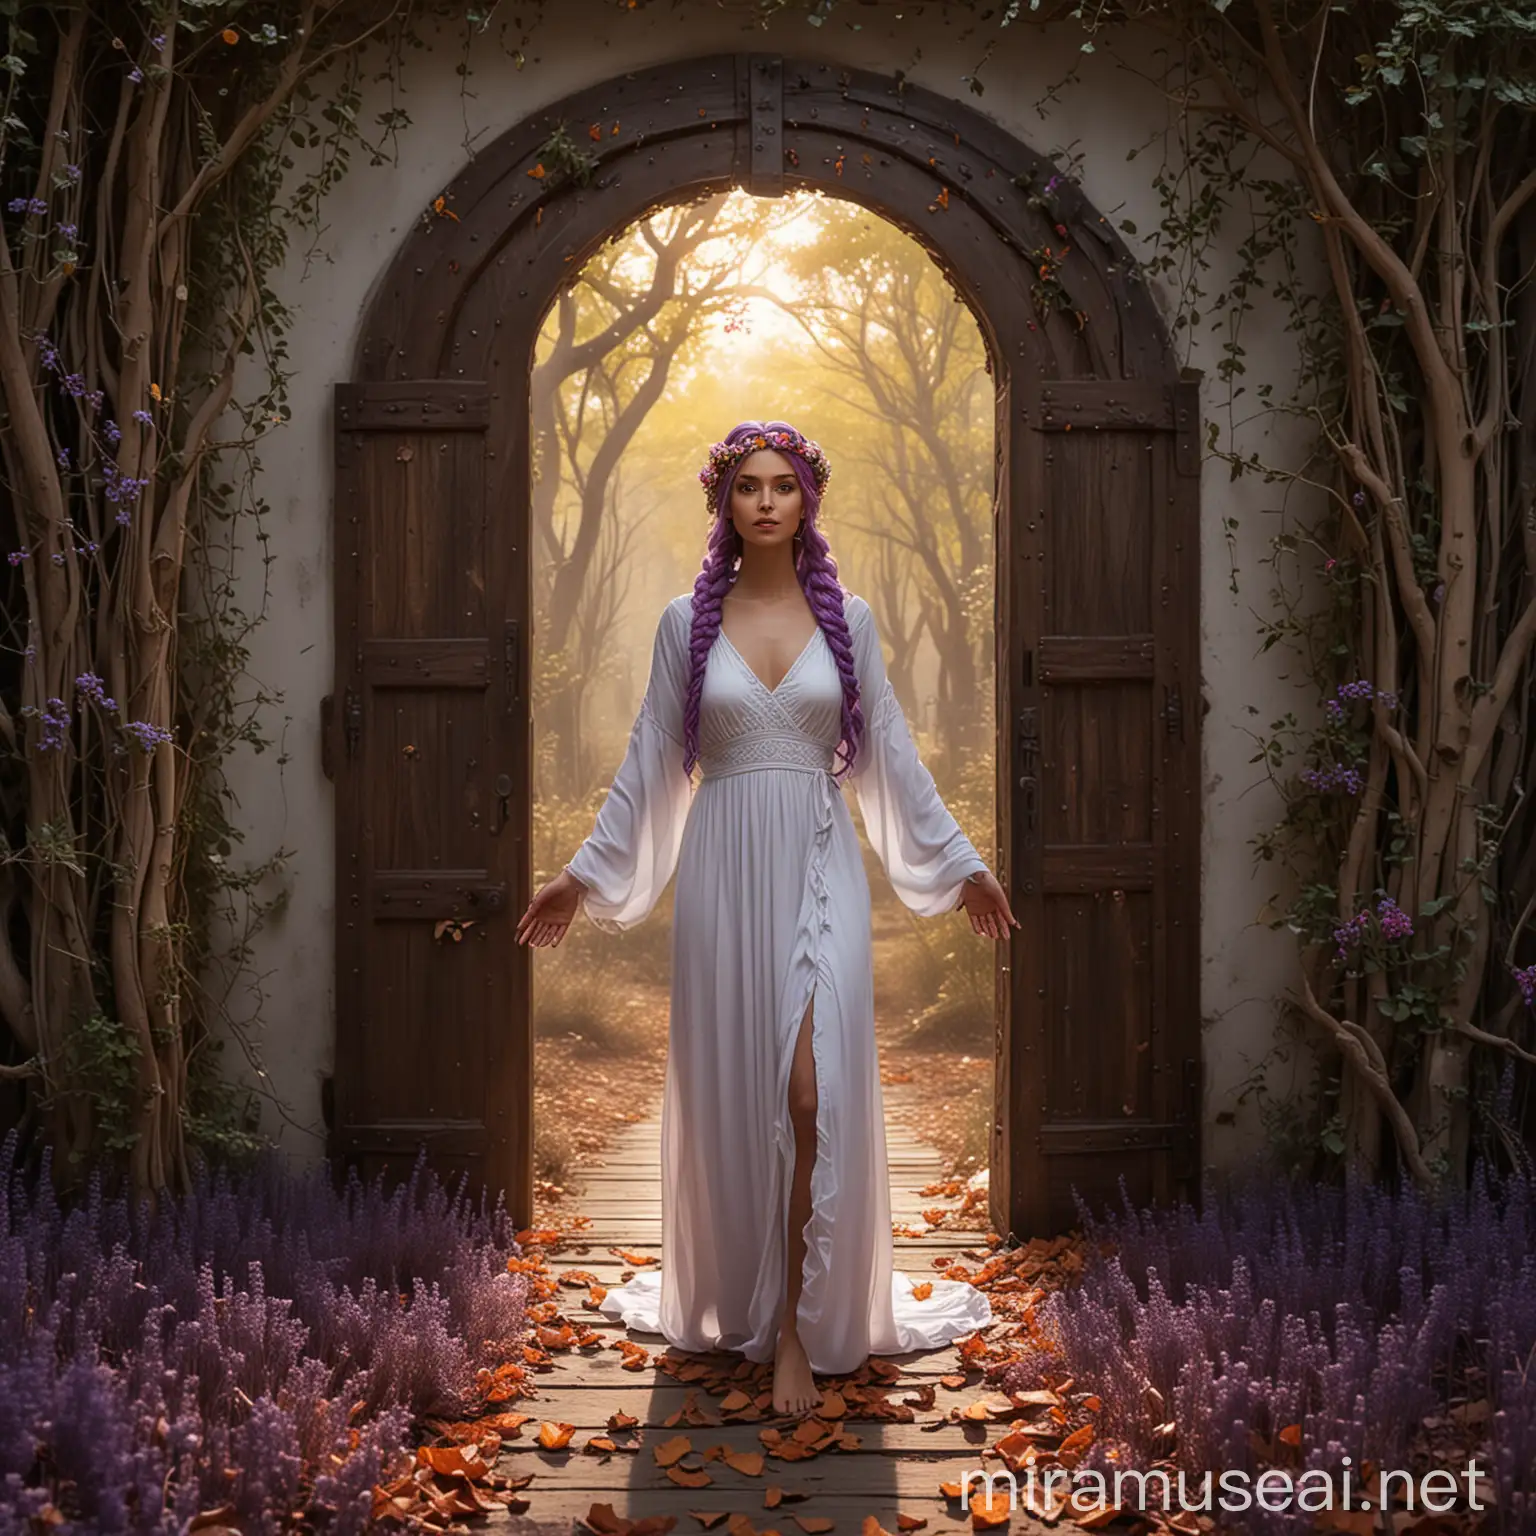 Mystical Arabian Woman Standing at Enchanted Forest Doorway